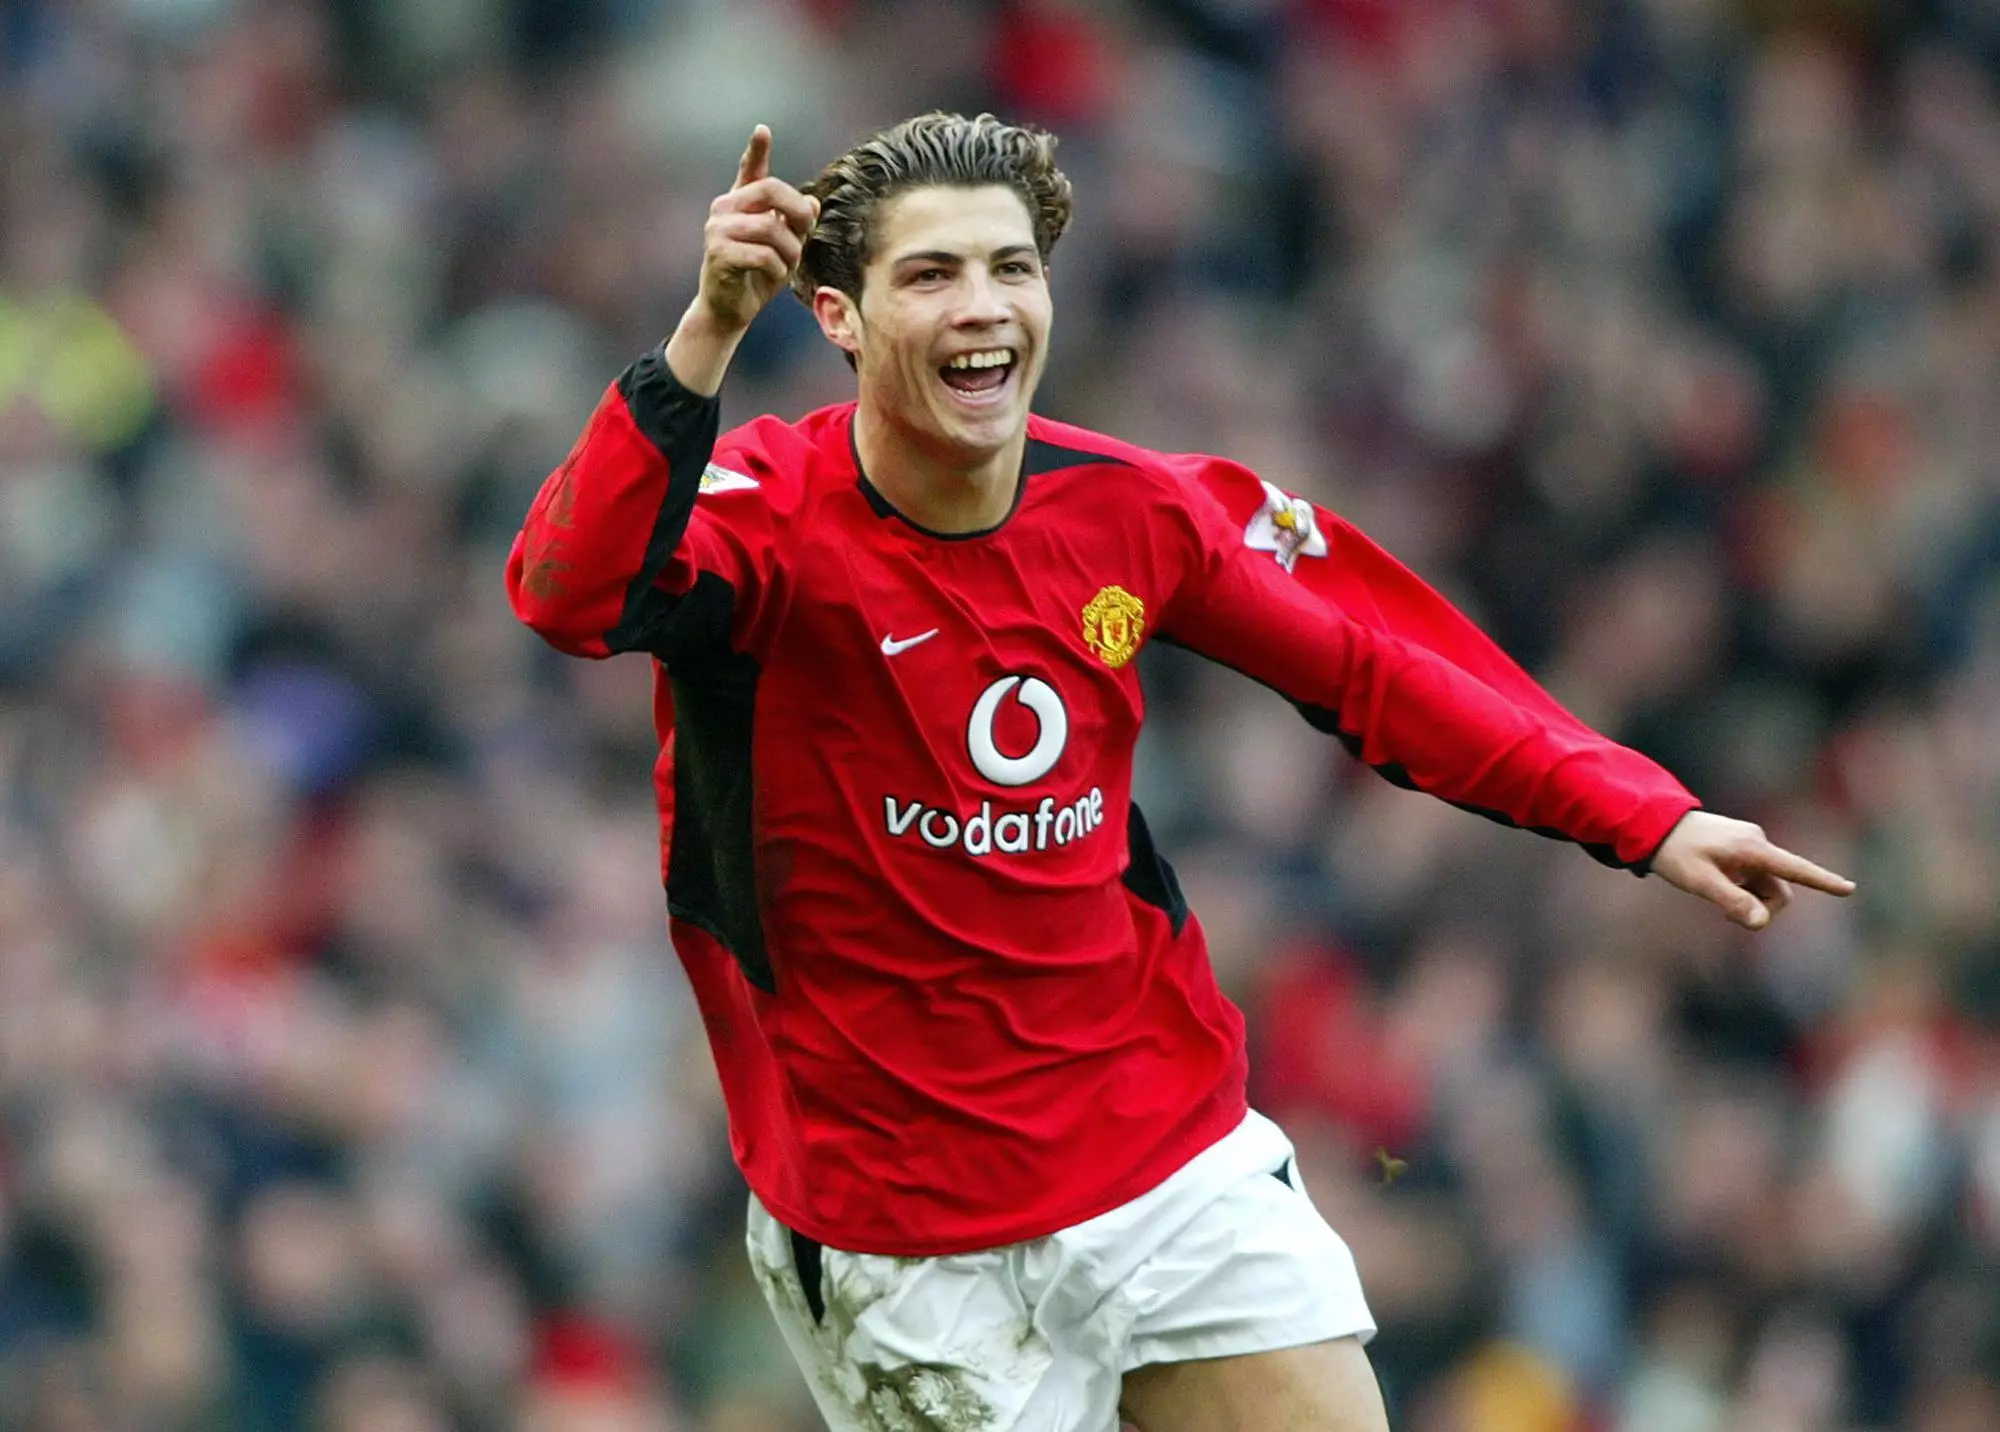 Ronaldo impressing in the early days at Old Trafford. Image: PA Images